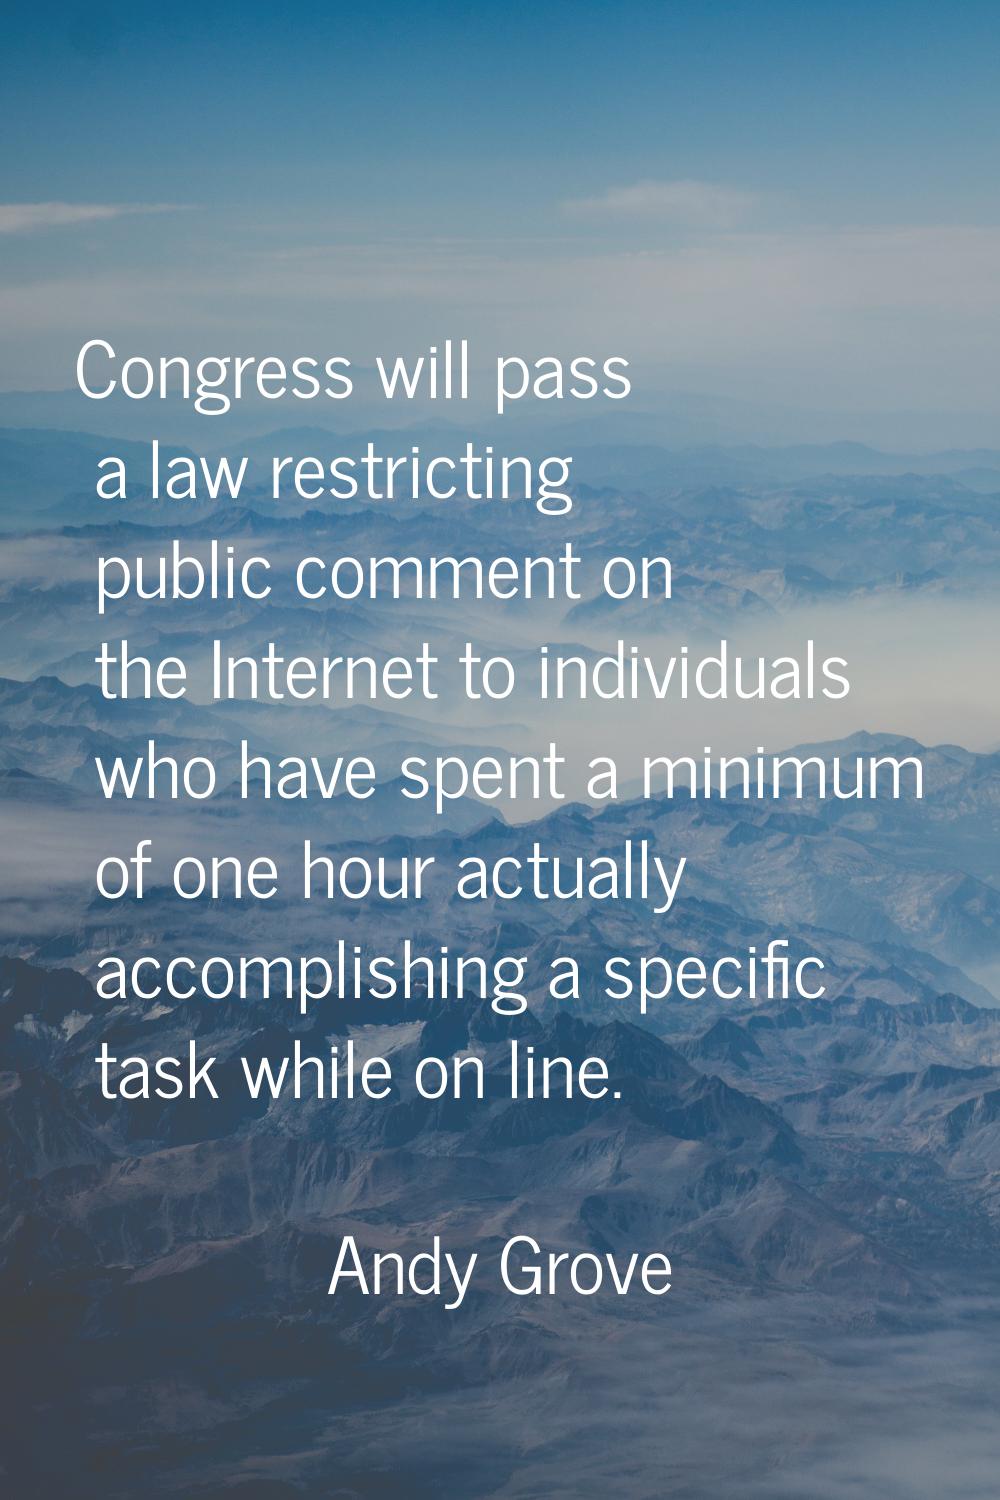 Congress will pass a law restricting public comment on the Internet to individuals who have spent a